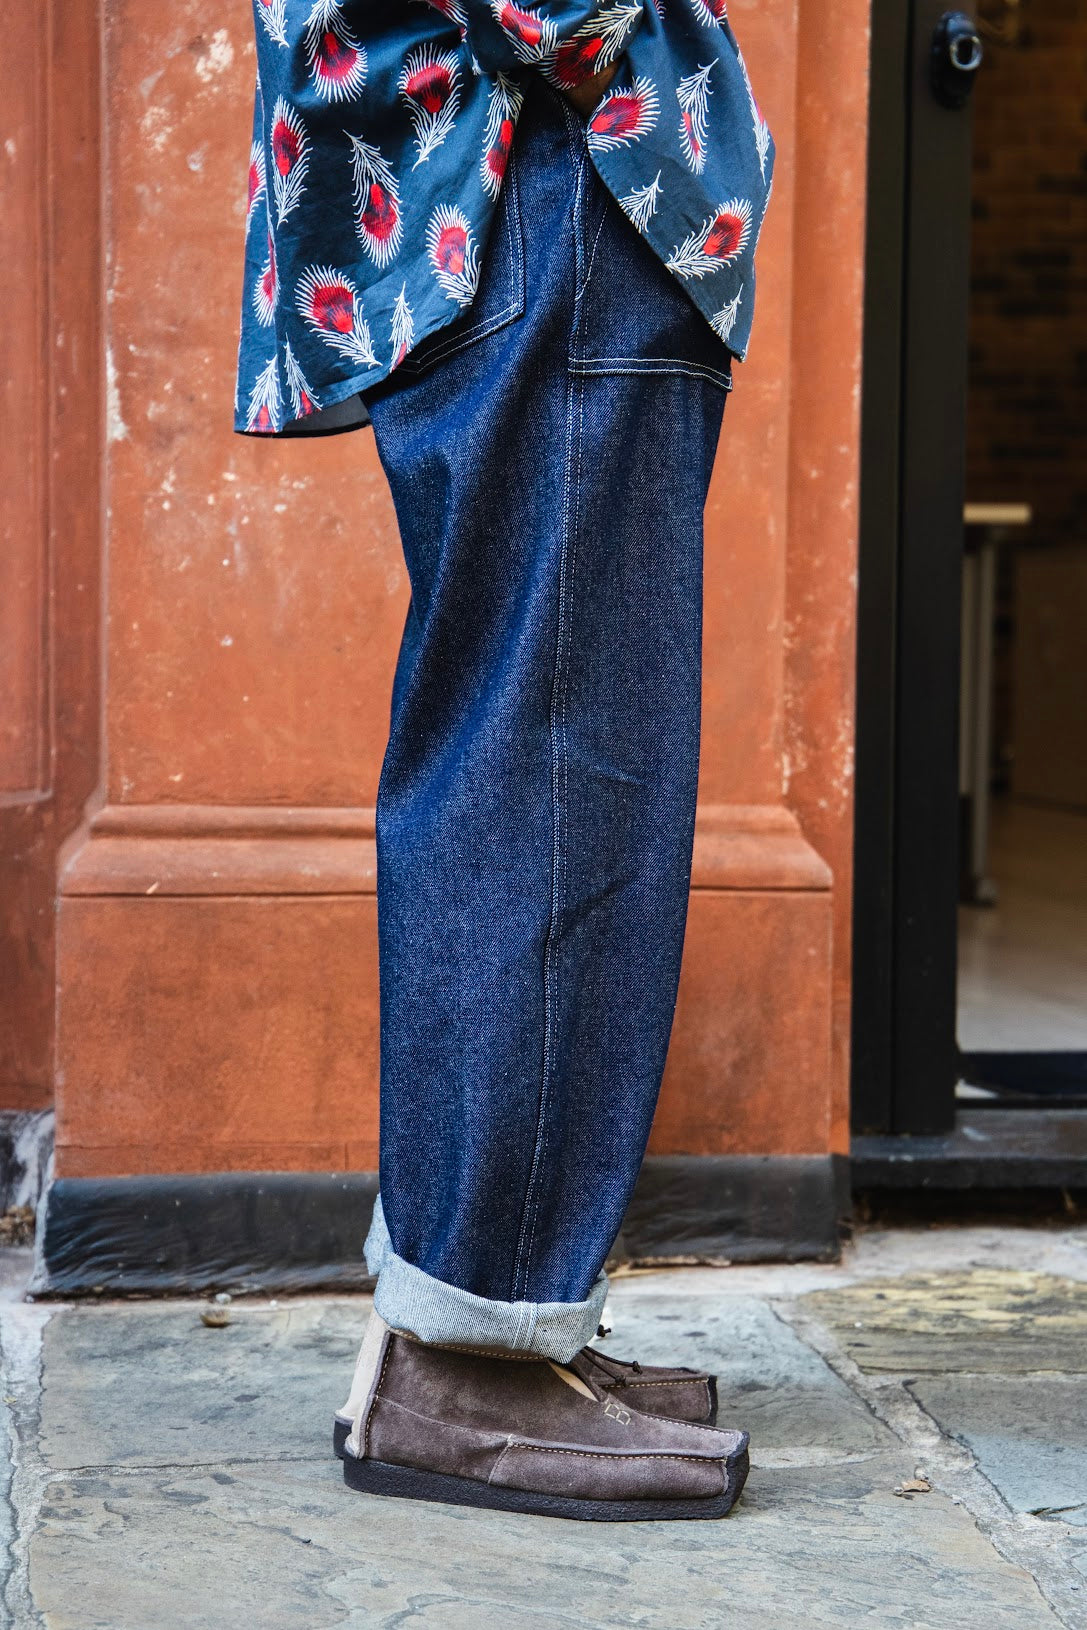 Shop Nepenthes, Needles, Engineered Garments & More | Nepenthes London